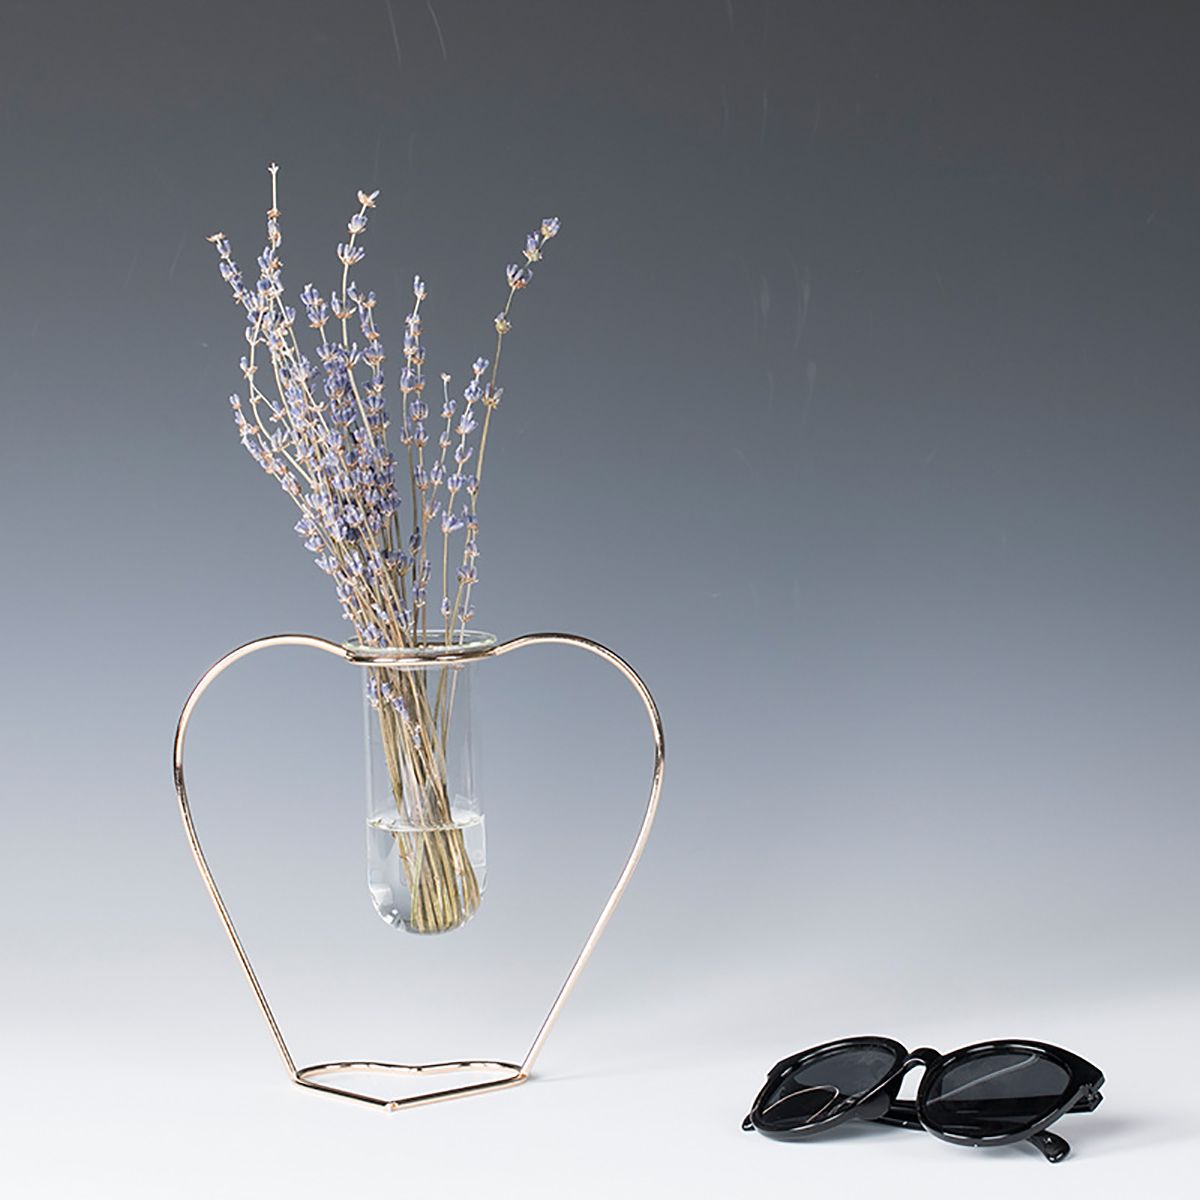 Crystal-Glass-Iron-Test-Tube-Vase-in-Wooden-Stand-Flower-Pots-Plant-1762955